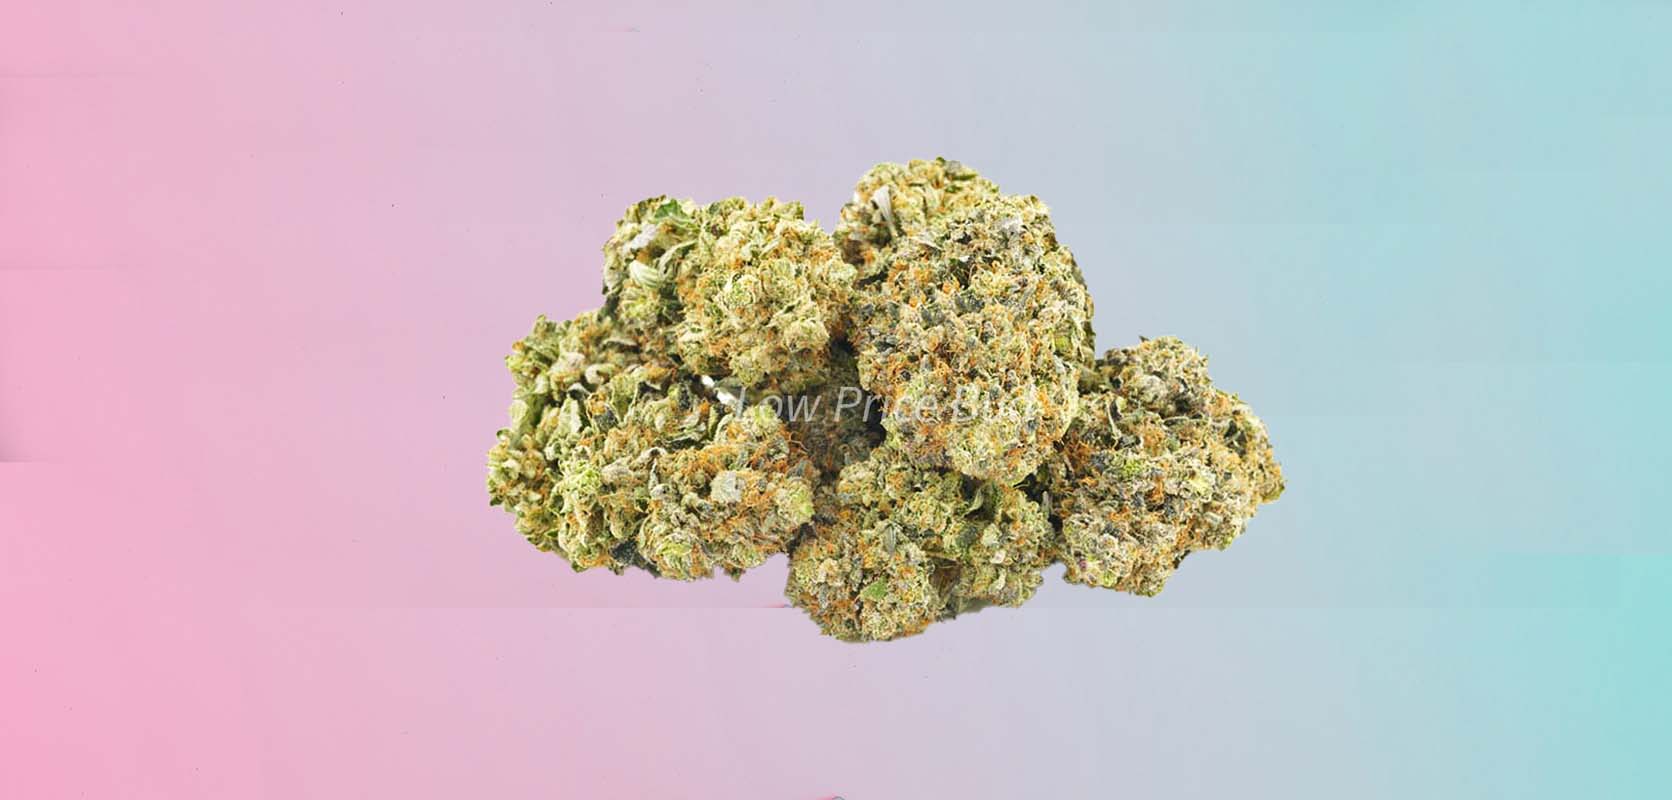 photo of black cherry soda strain cheap weed for sale online from lowpricebud.co online dispensary canada.